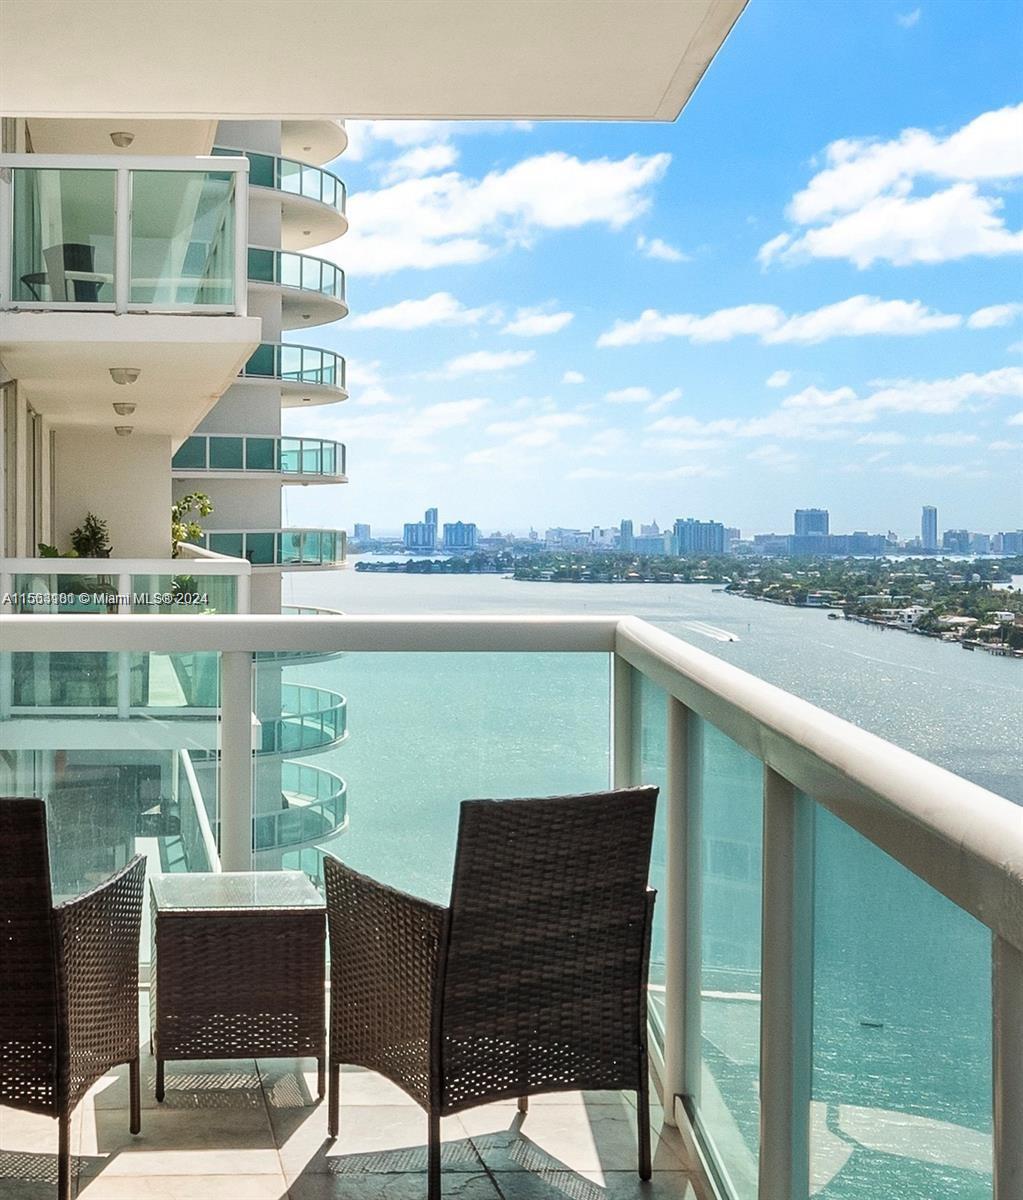 Must see unit w/Spectacular Bay & Sunset views from the on 27th floor unit at 1800 Club located in Edgewater in the heart of all that's happening in New Urban Miami. Spacious 2 beds 2 baths 1810 ft.² of AC space + 236 sqft in balconies. Split bedroom plan. Full size washer/dryer &  Cable, Internet, water, and one parking, Great closet/storage space. Cable, internet & water included in low HOA. Heated Pool, State of the Art Gym, Business Center, all w/beautiful views of the Bay. Located across from Margaret Pace Park & within walking distance to public transportation, restaurants, banking & Publix. Miami’s best restaurants, entertainment & sports events are just minutes away.